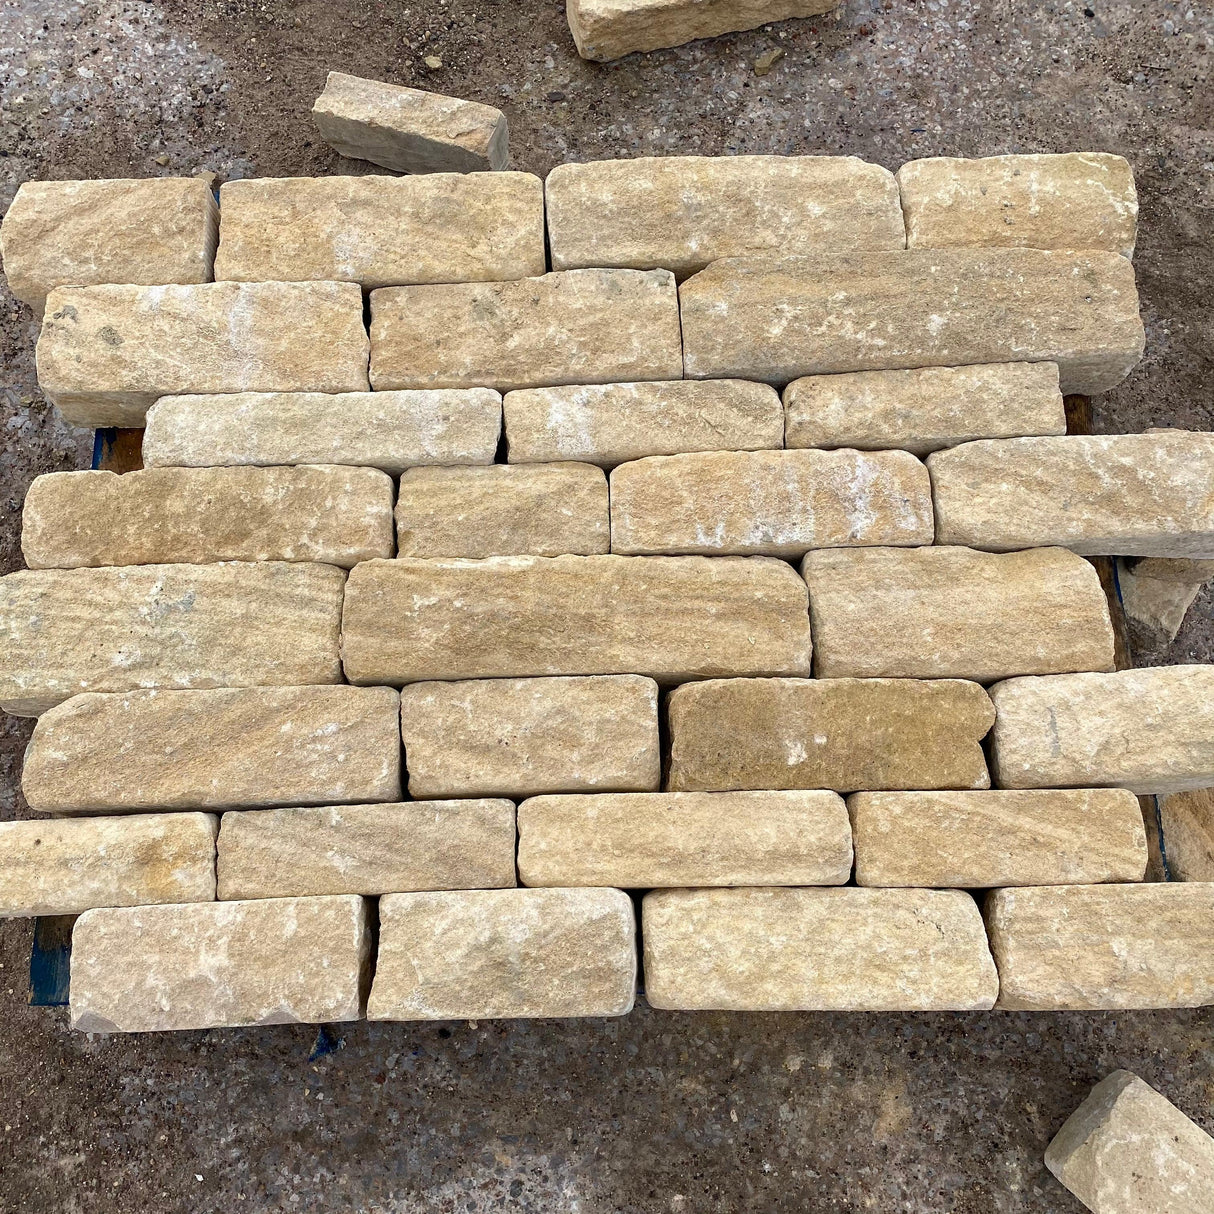 Reclaimed Natural Stone Buff Yorkshire Building Stone - 4” Bed - Bulk Bags - Reclaimed Brick Company